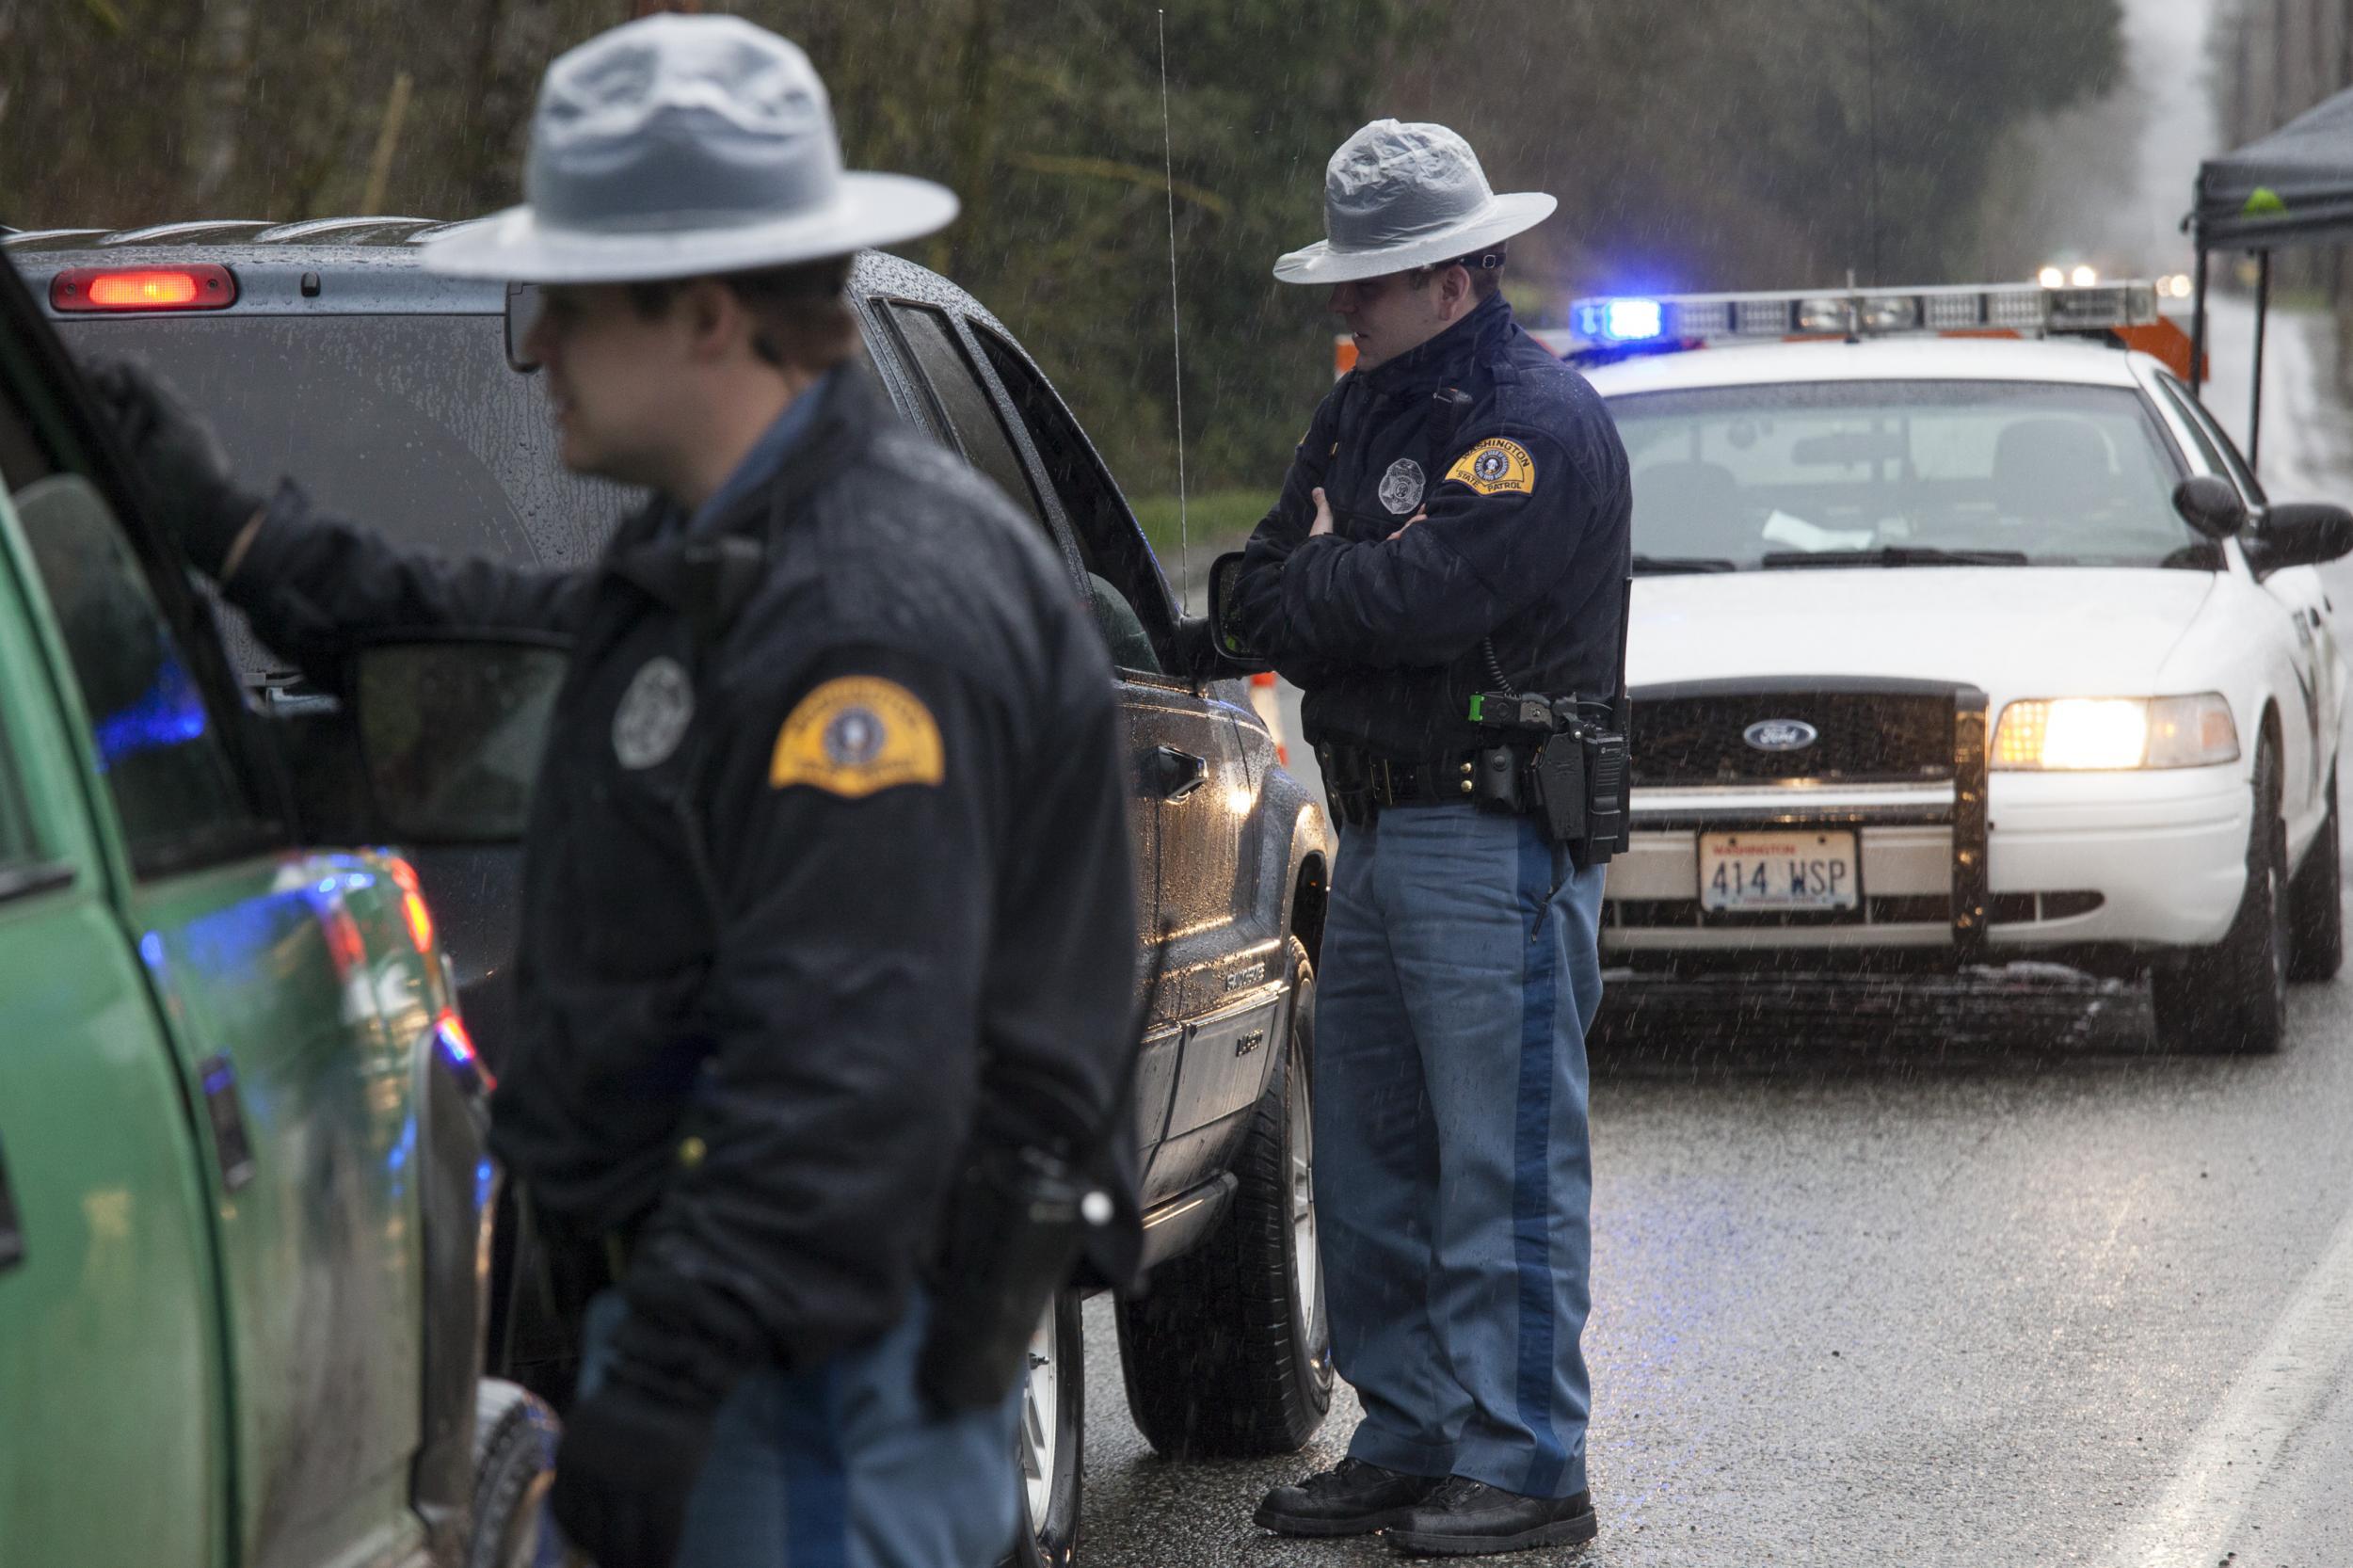 Washington State Patrol troopers stop vehicles at a road block on a local highway